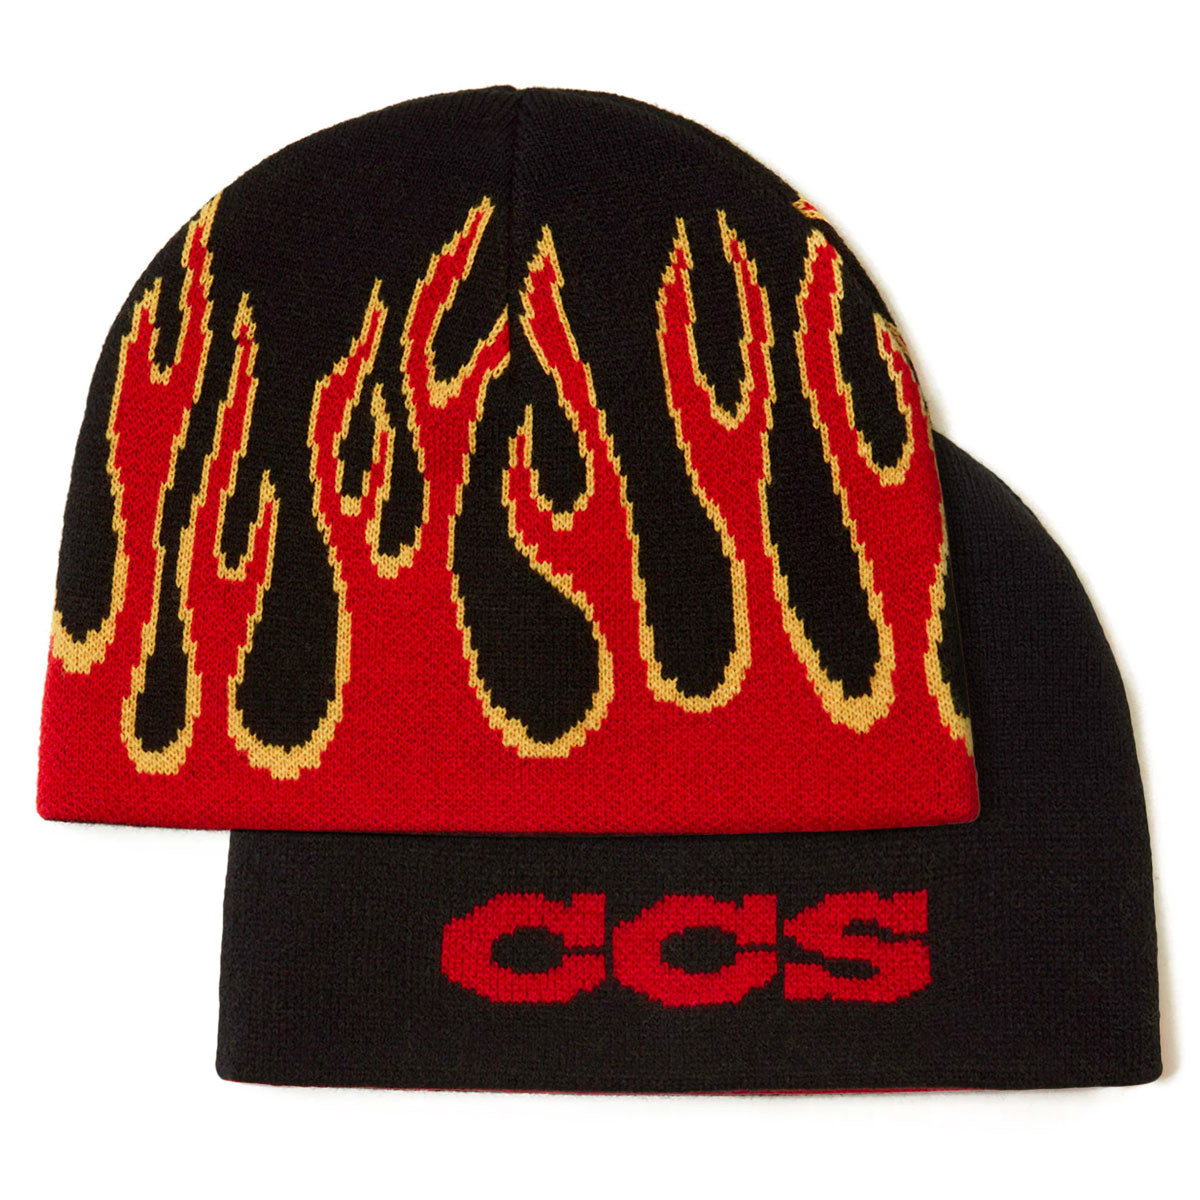 CCS Flames Reversible Skully Beanie - Black/Red image 1